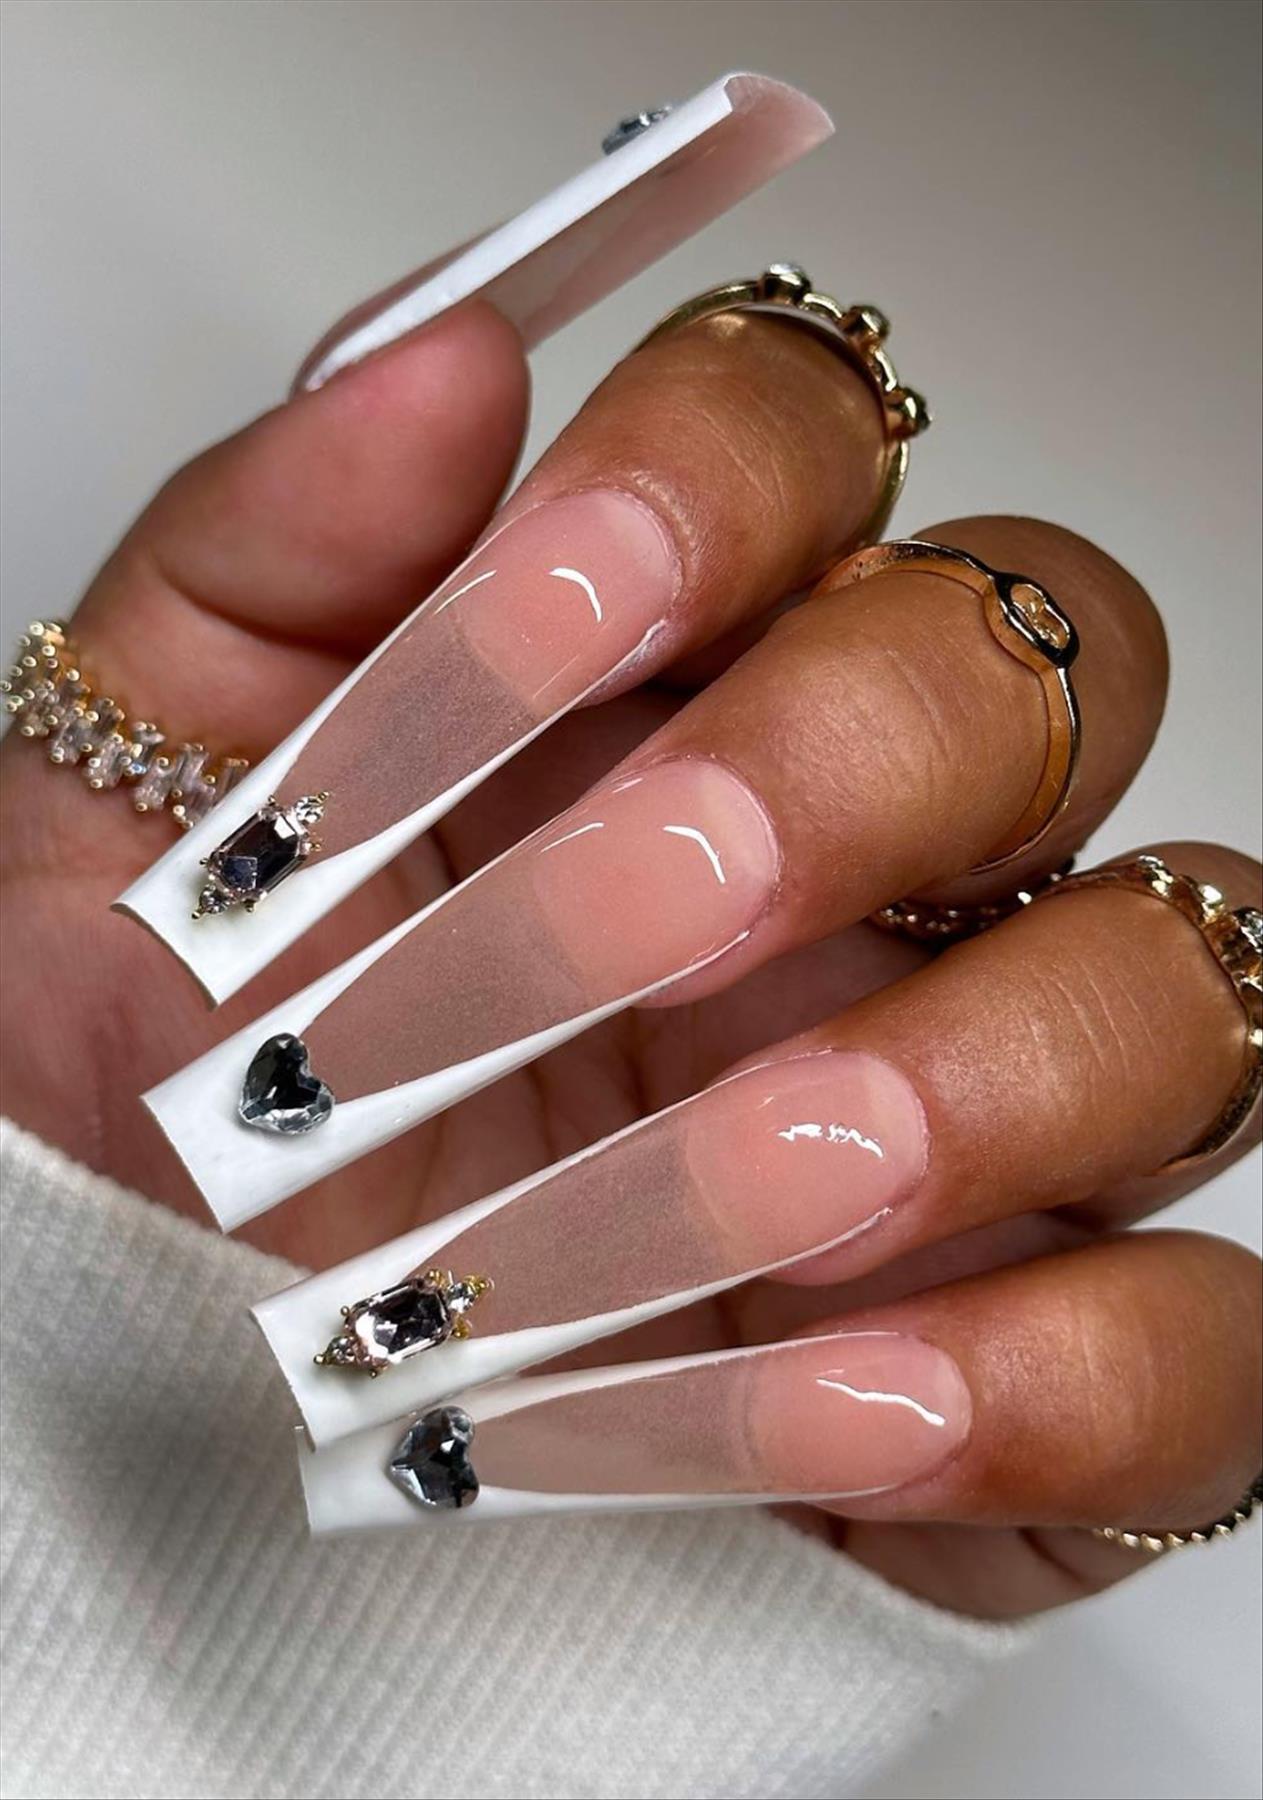 Lovely Valentine's day coffin nails design perfect for 2023